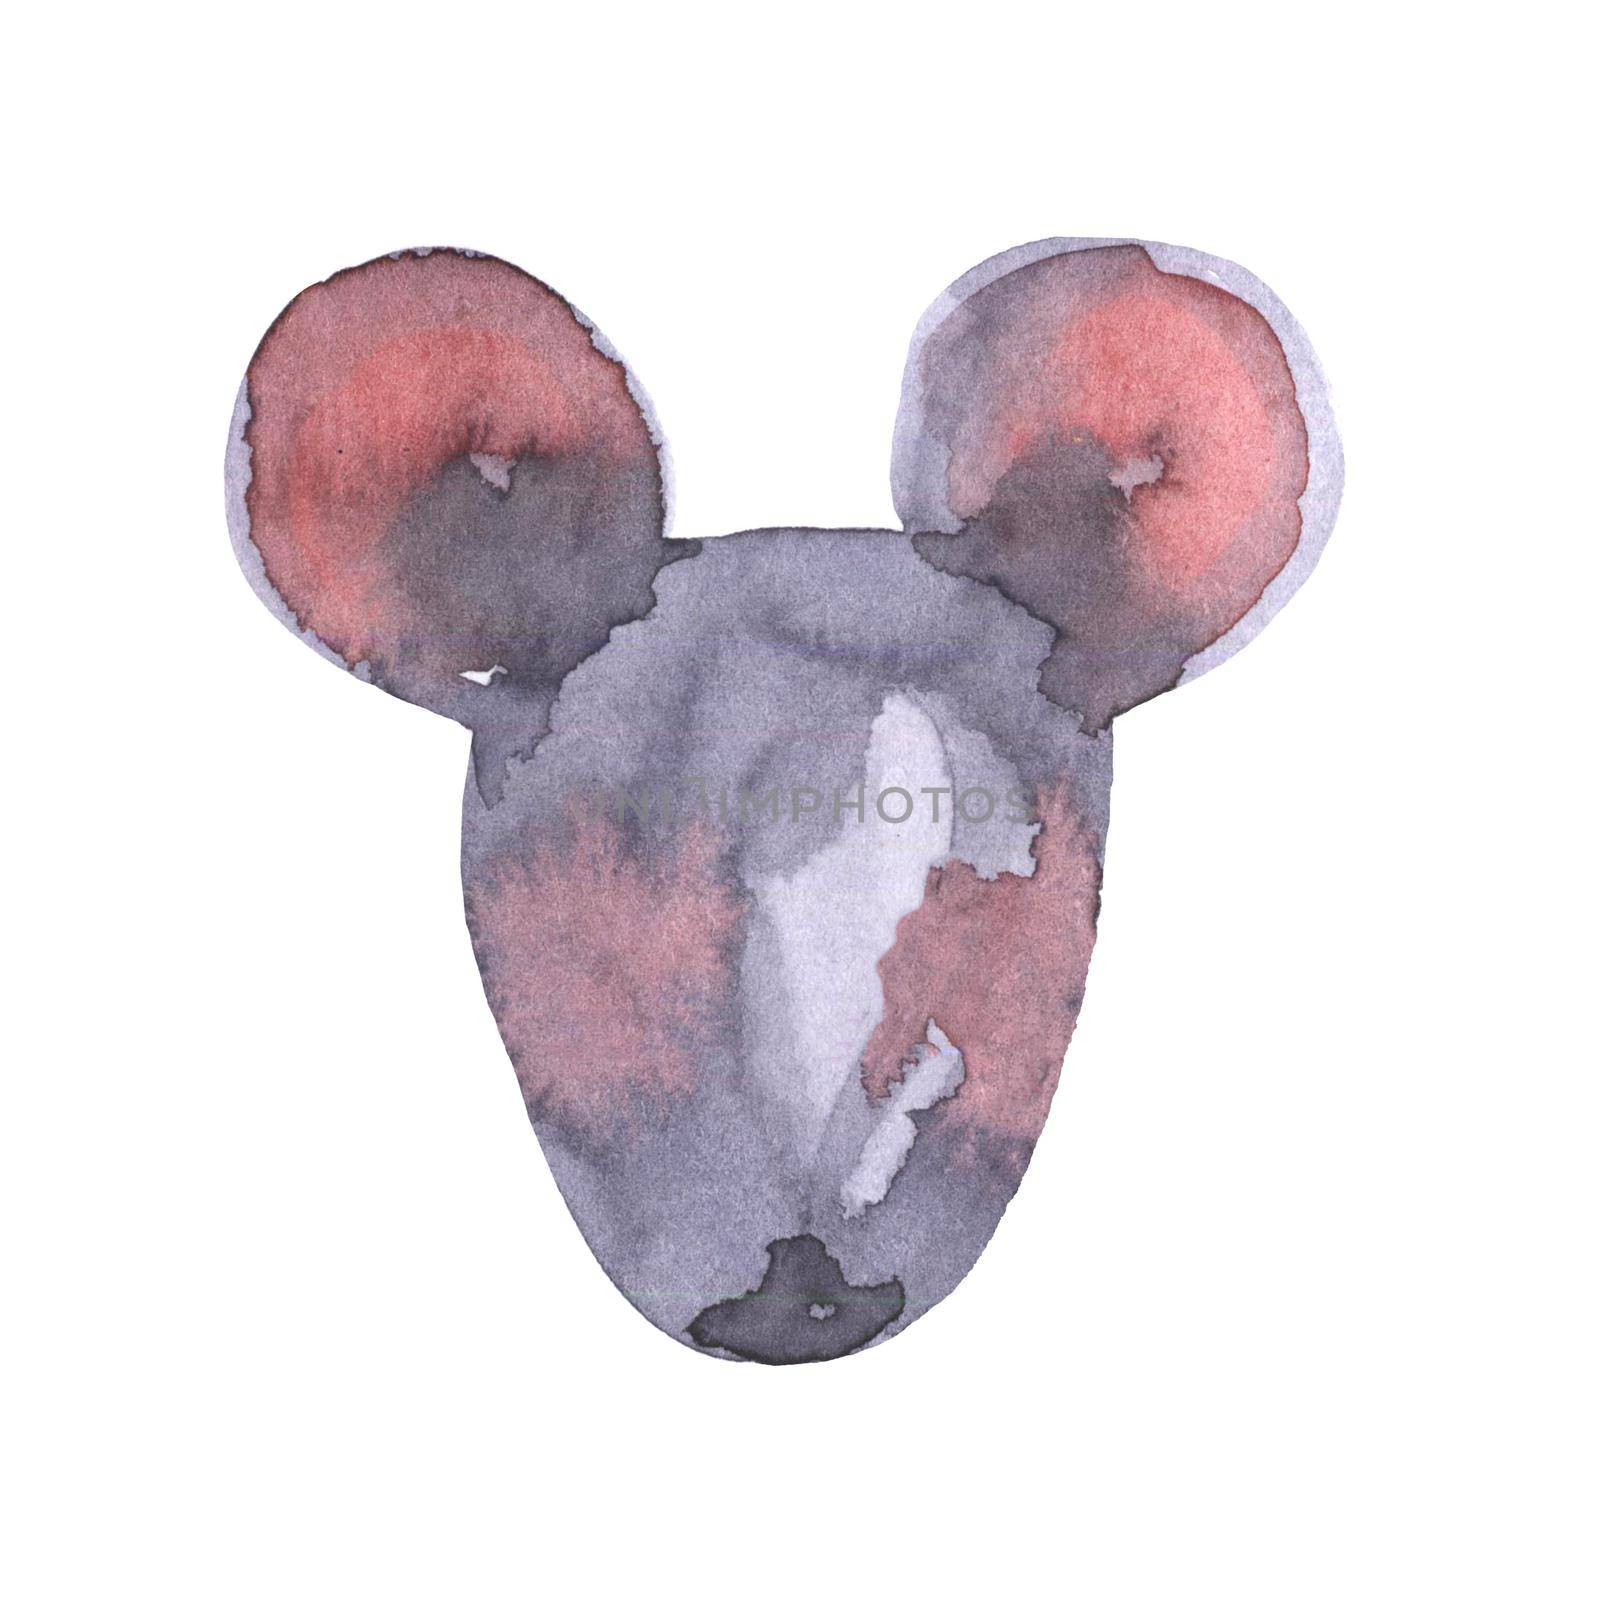 Mouse watercolour illustration. Funny icon of animal. Grey rat with pink ears isolated on white background. 2020 new year painting symbol. Drawing art object for design by DesignAB